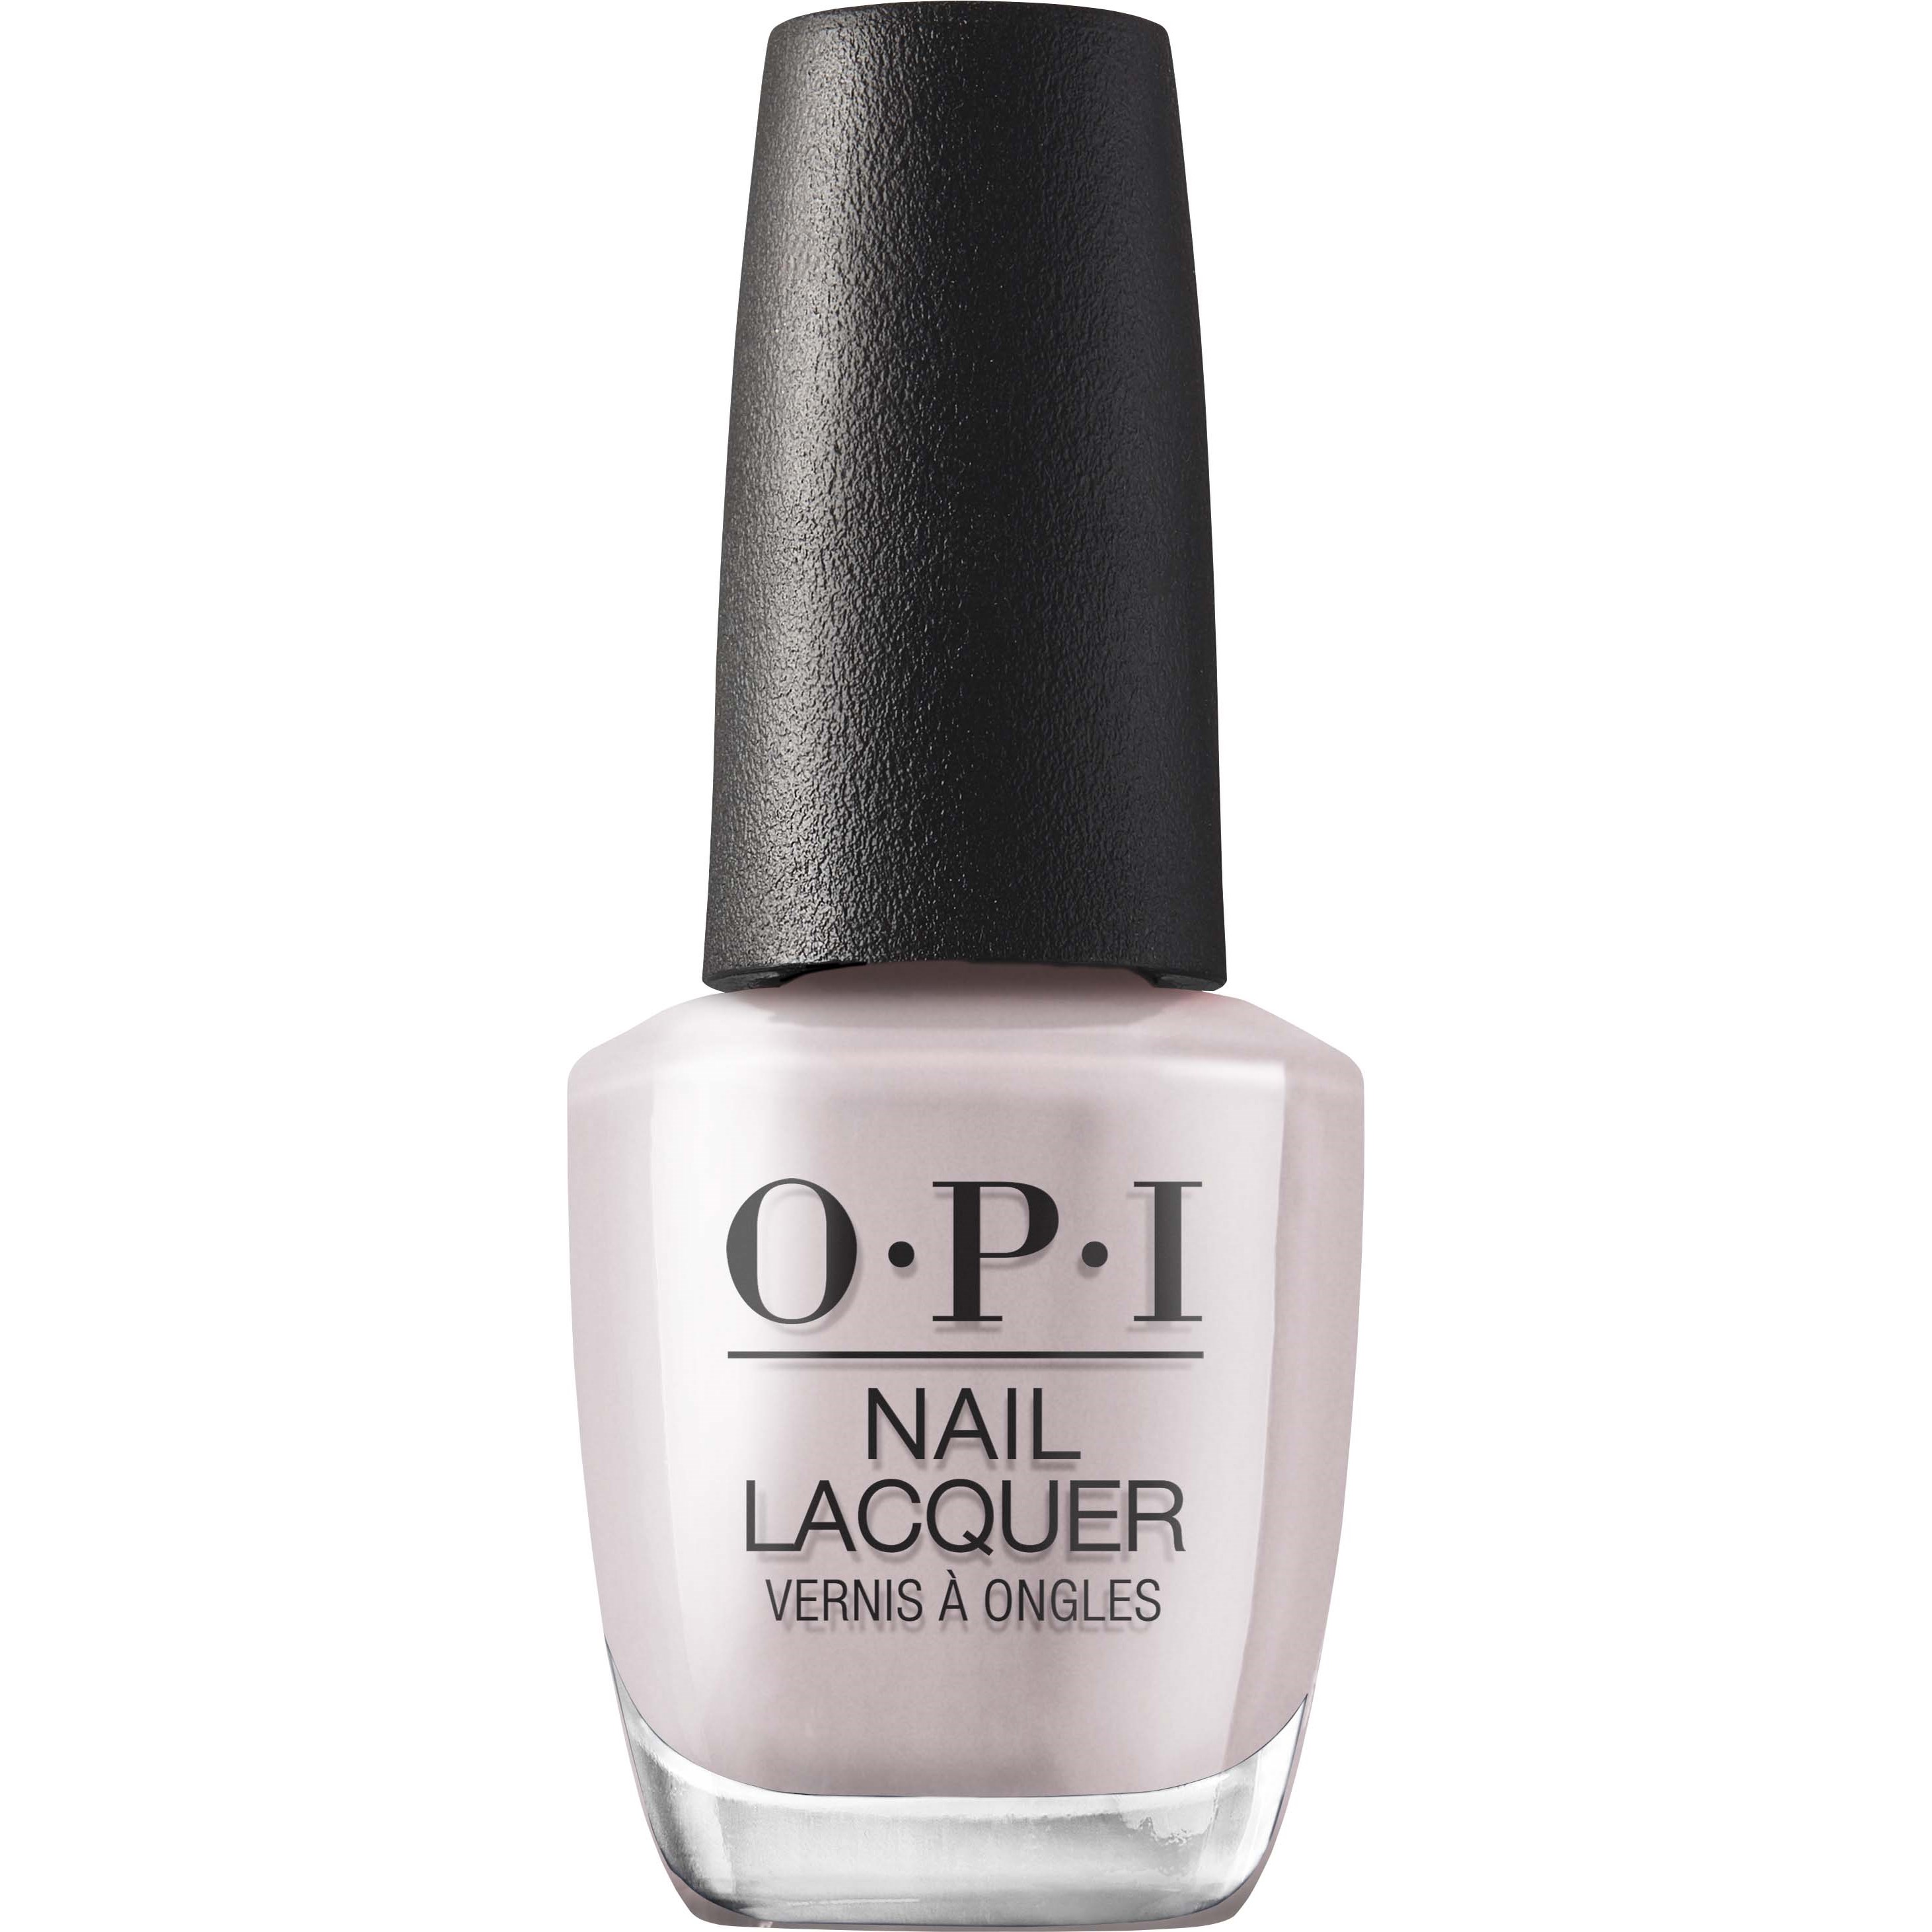 OPI Fall 22 Fall Wonders Nail Lacquer Peace of Mined